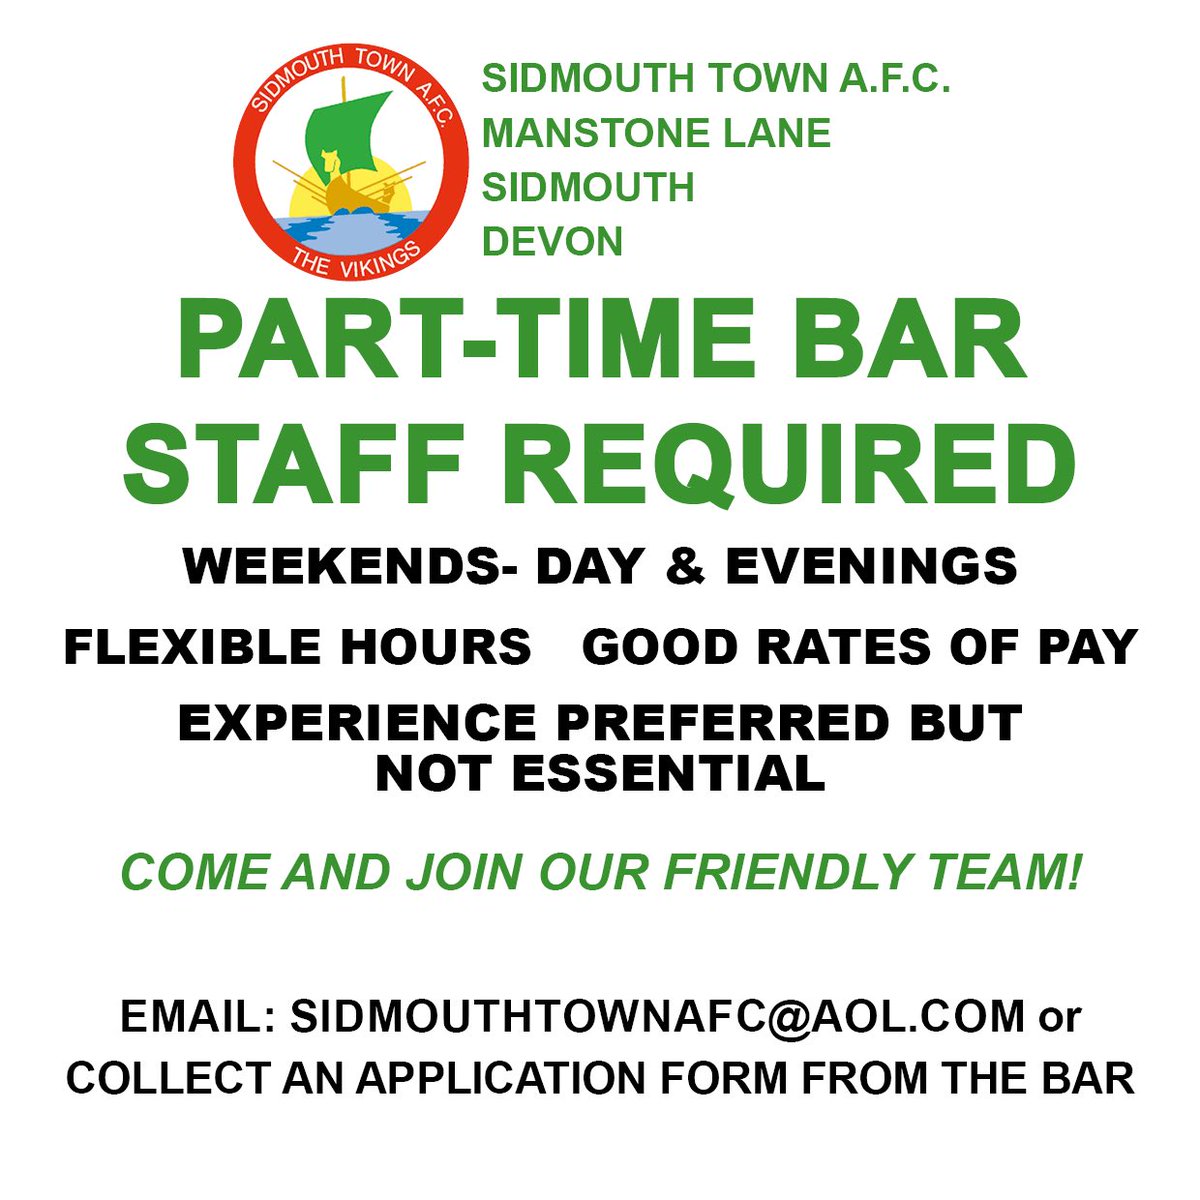 BAR STAFF NEEDED‼️🚨 • Part time ✅ • Flexible hours ✅ • Good rates of pay ✅ Come and join our friendly team! Contact details below ⬇️ #UTV💚 #OneClub